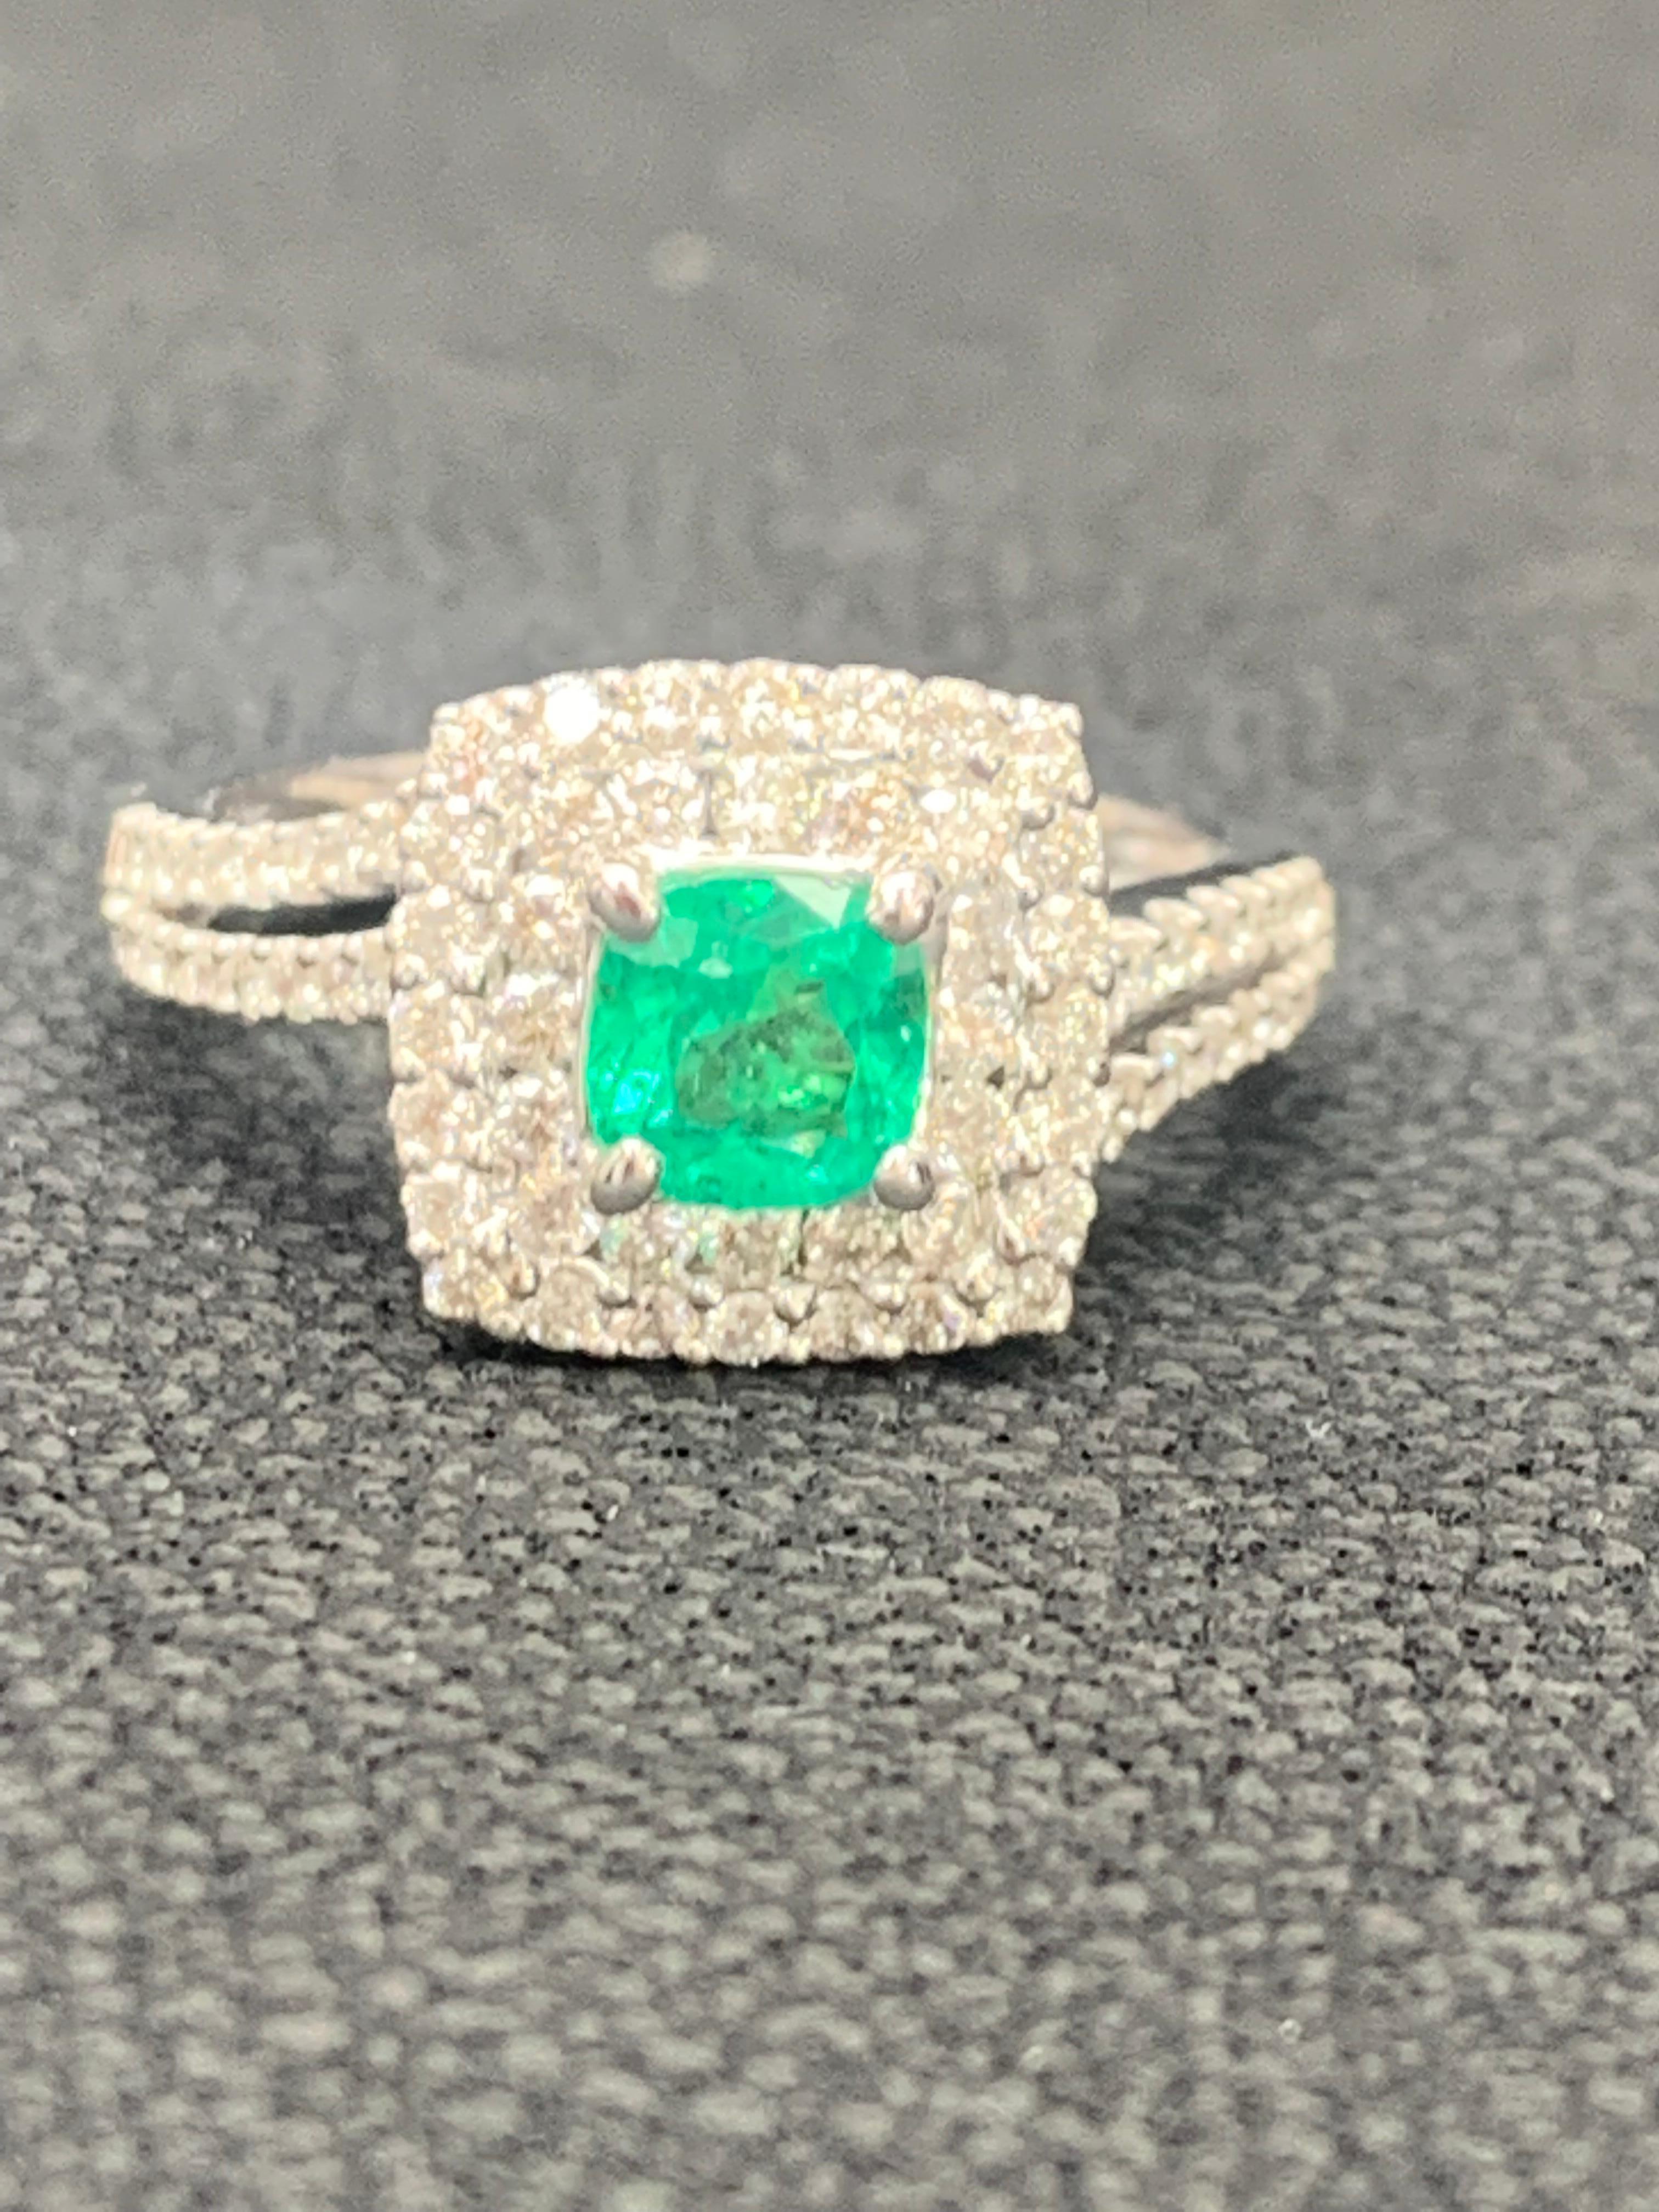 0.48 Carat Cushion Cut Emerald and Diamond Fashion Ring in 18K White Gold For Sale 8